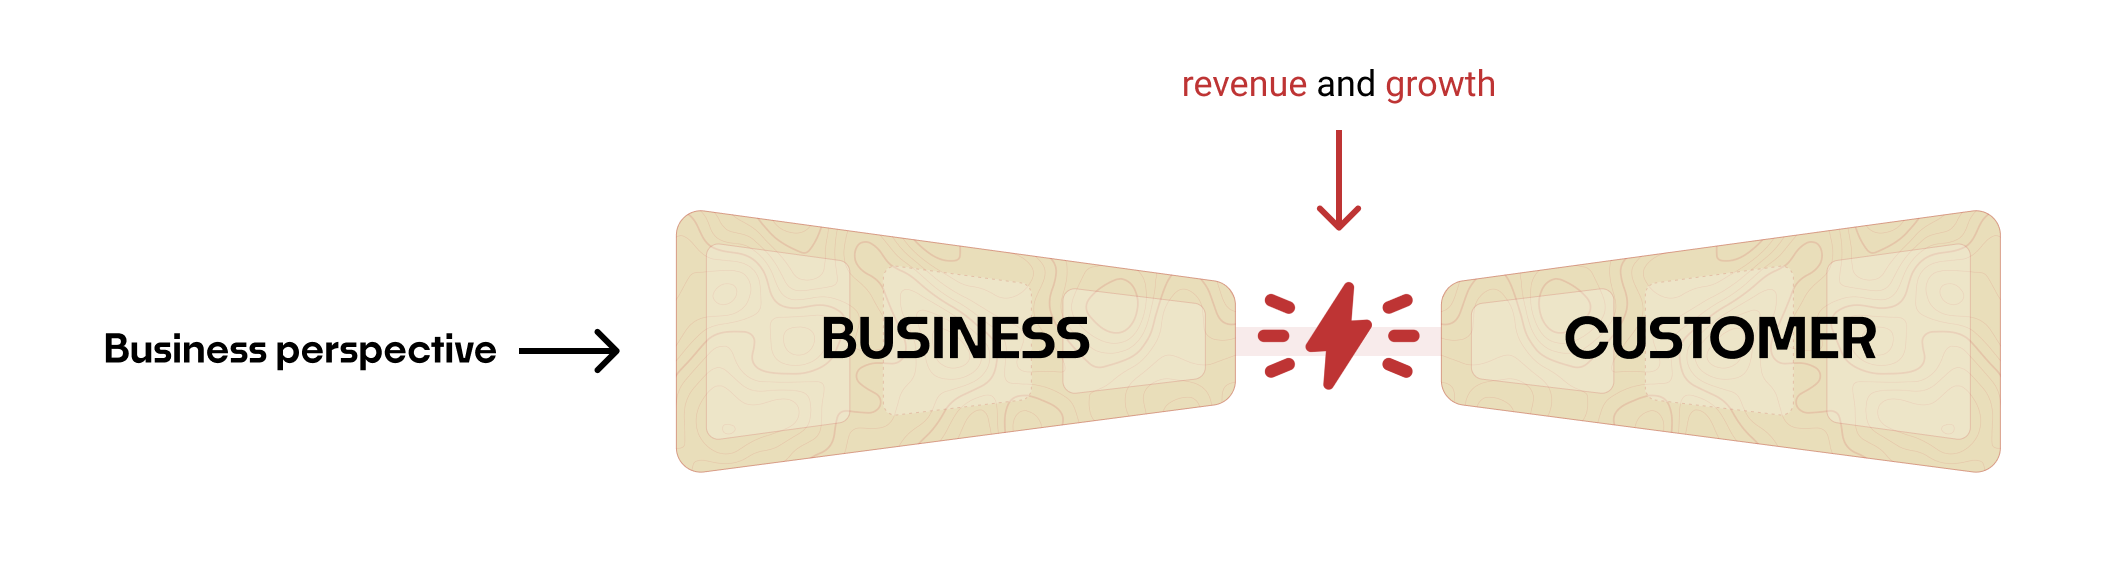 Two wedges, the left labeled "Business" and the right labeled "Customer" are pointing toward each other. They are labeled "Business perspective." In betwen the Business and Customer wedges is a lightning spark, that is labeled "revenue and growth."